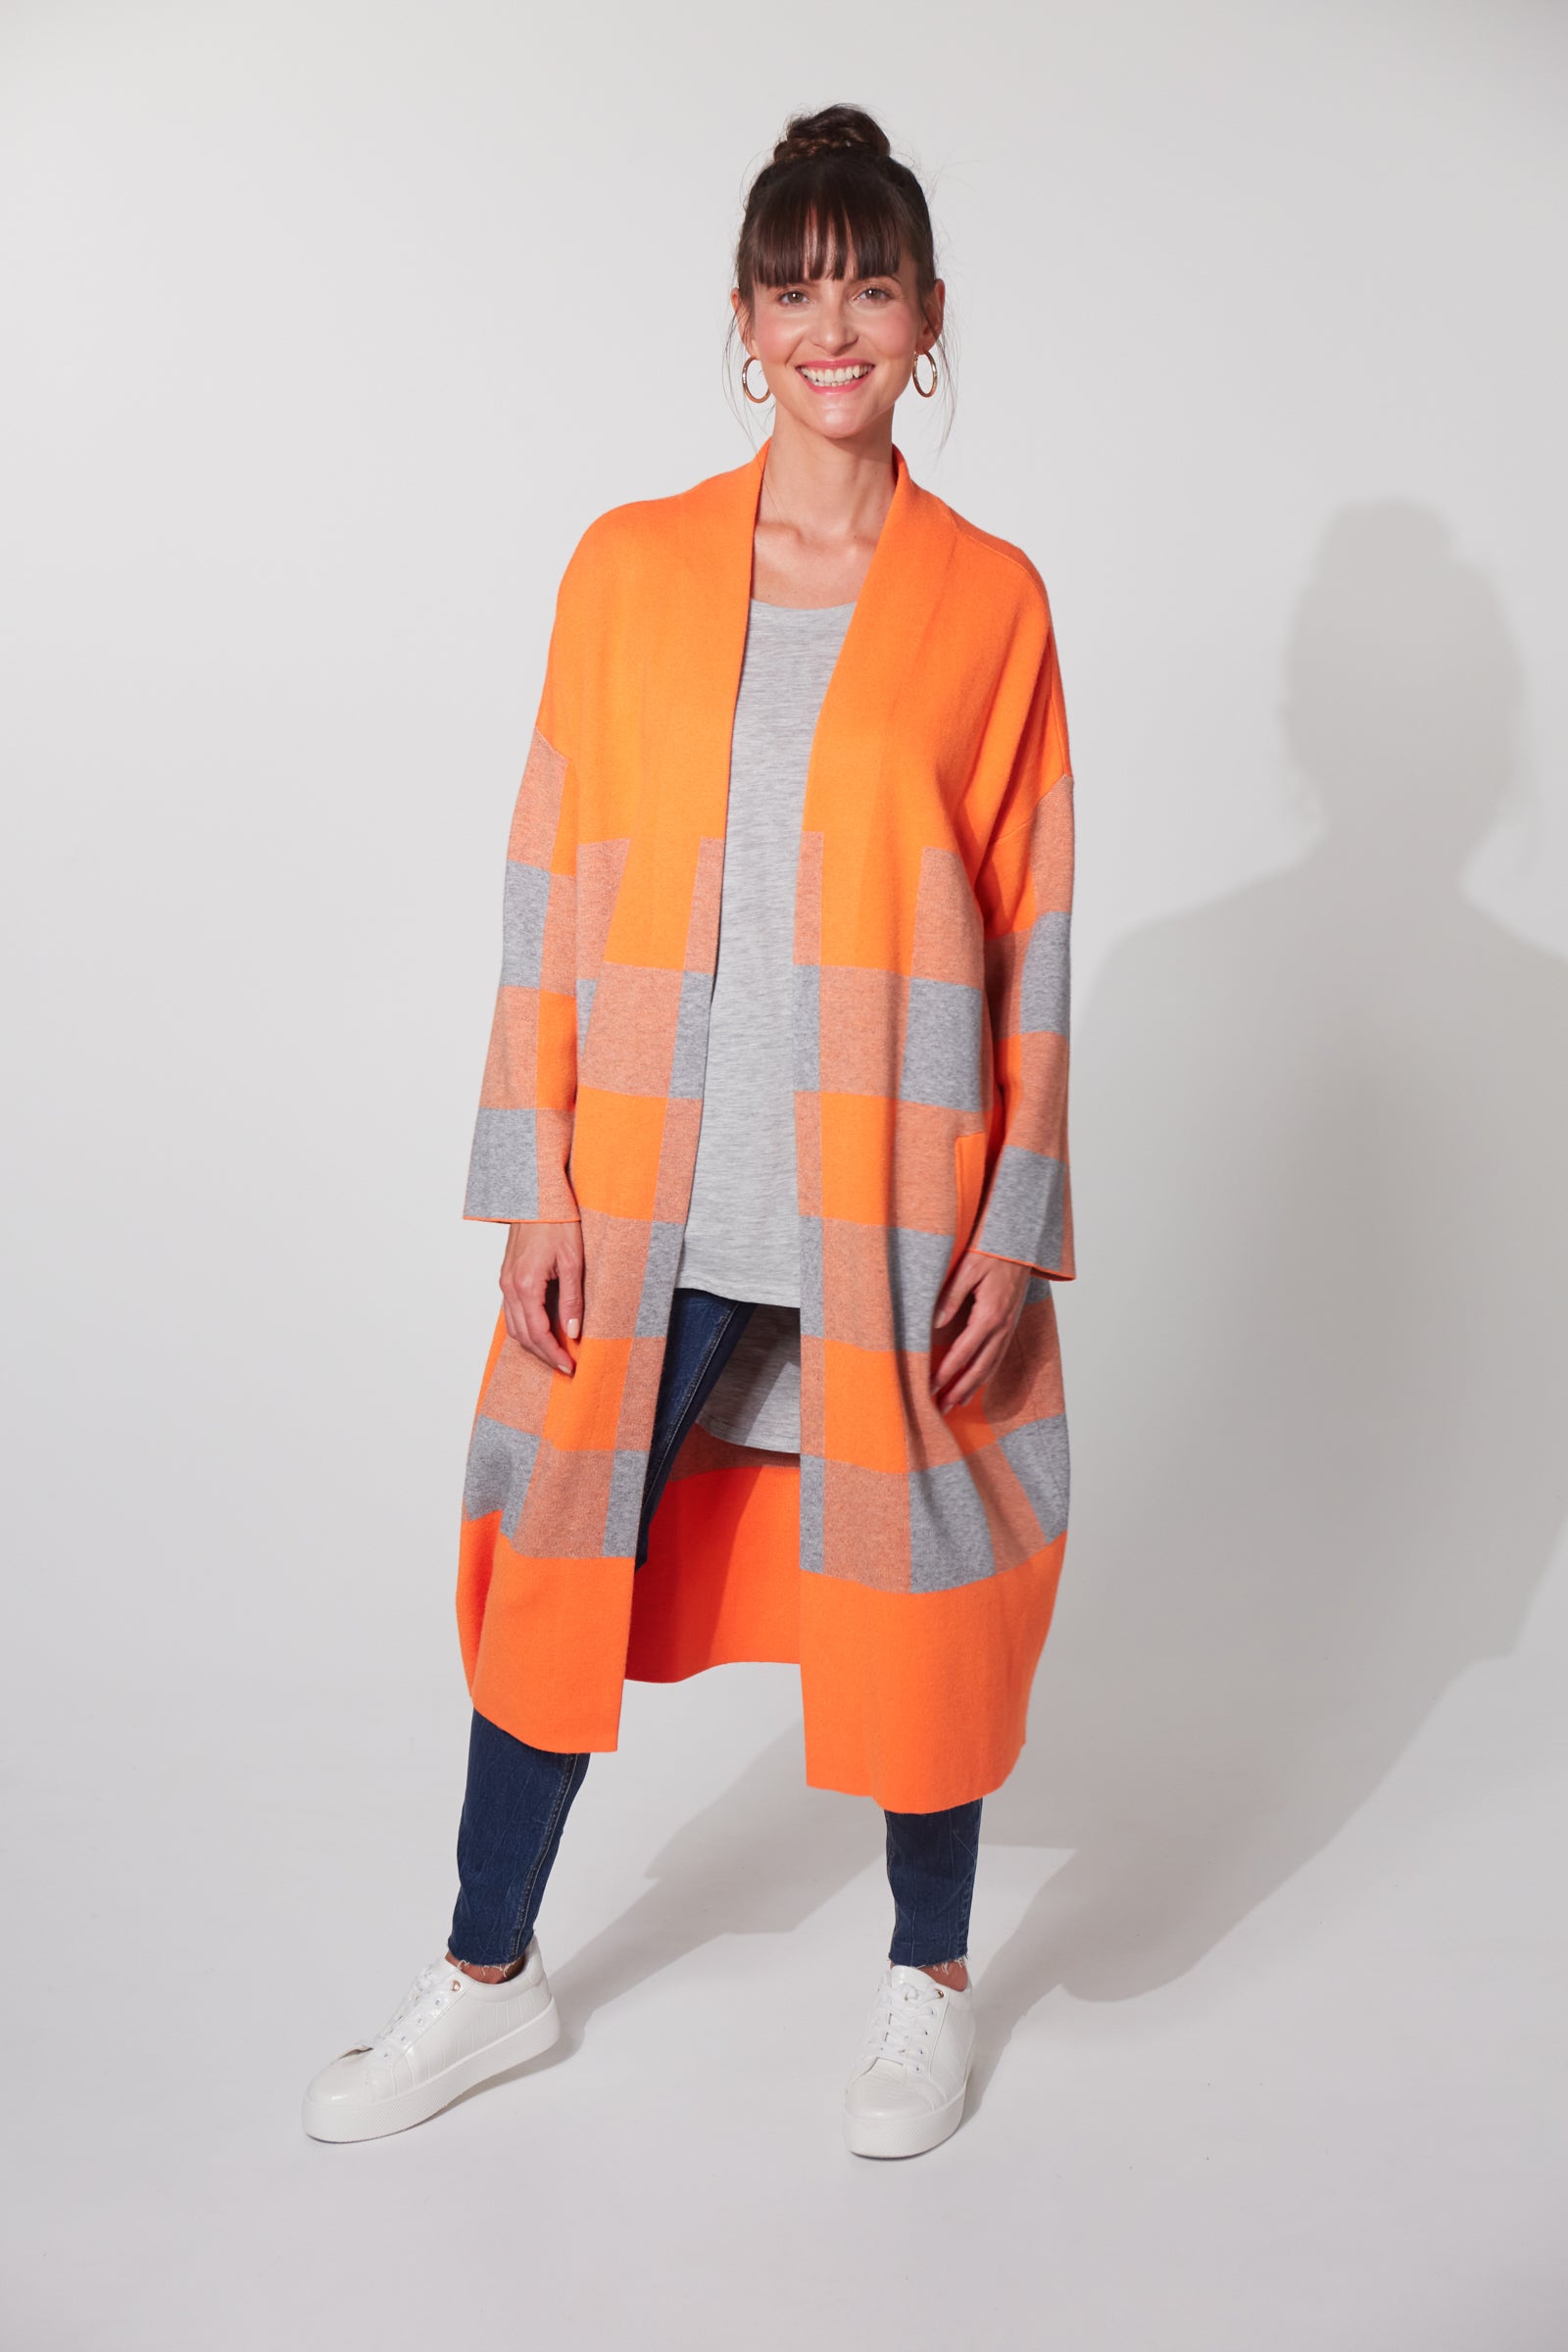 Harris One Size Cardigan in Sherbet Check